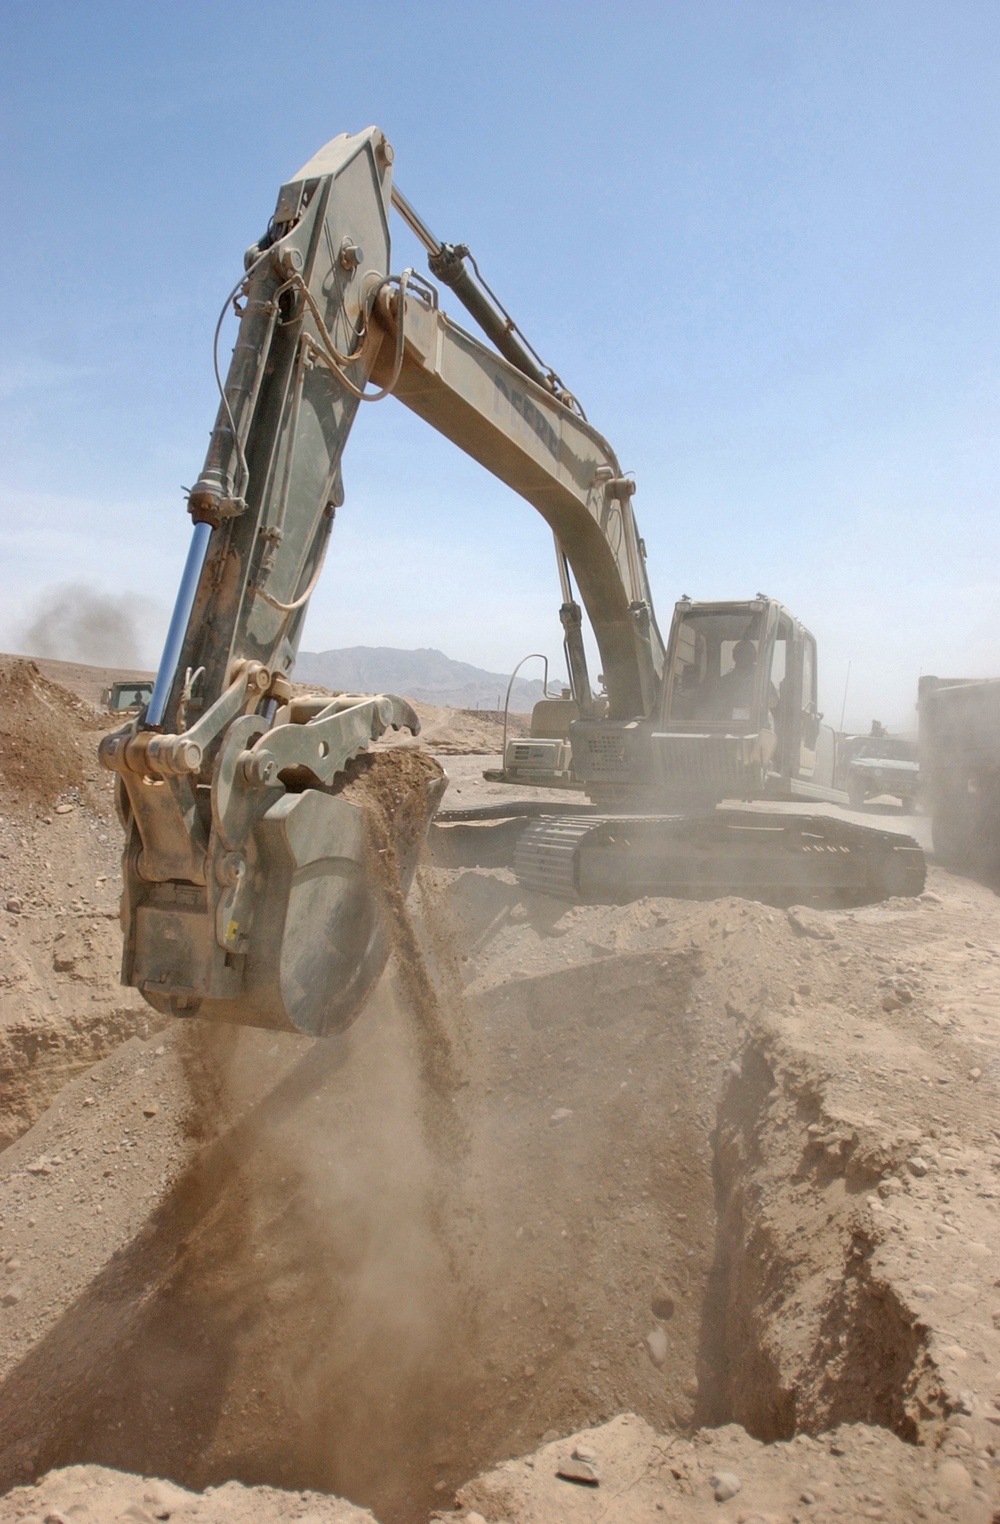 Sgt. Wilson Harding uses an excavator to collect dirt